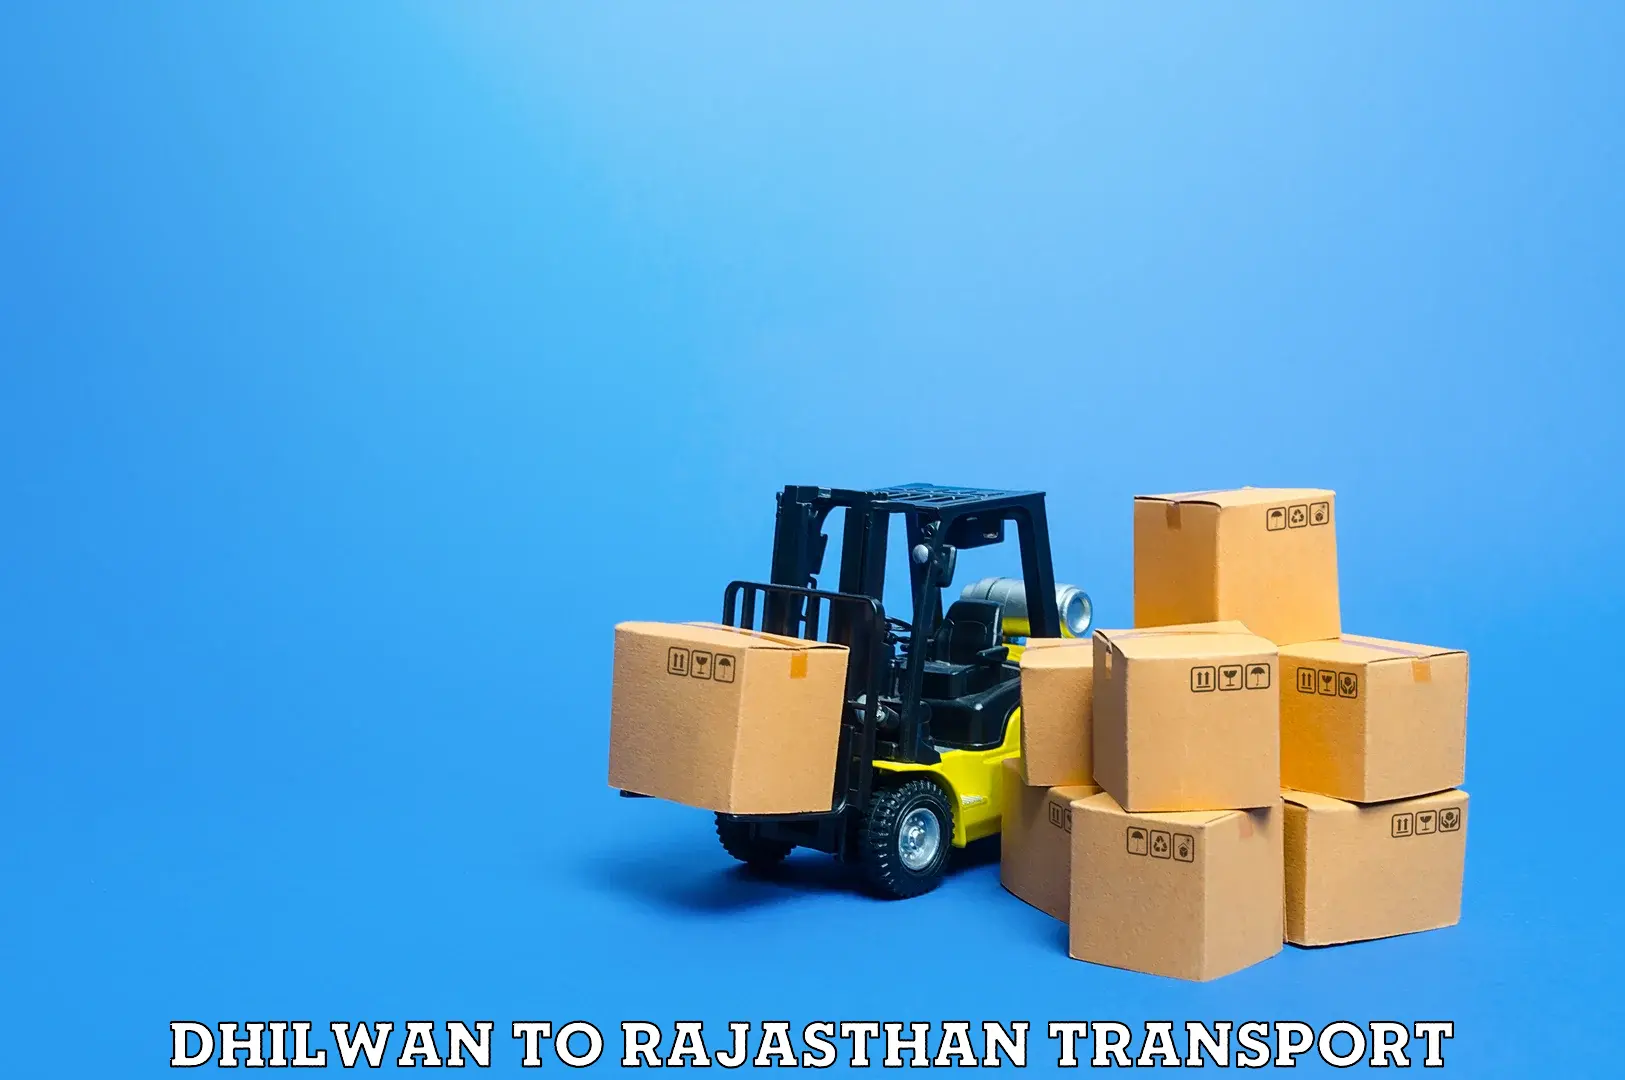 Daily parcel service transport Dhilwan to Jaipur